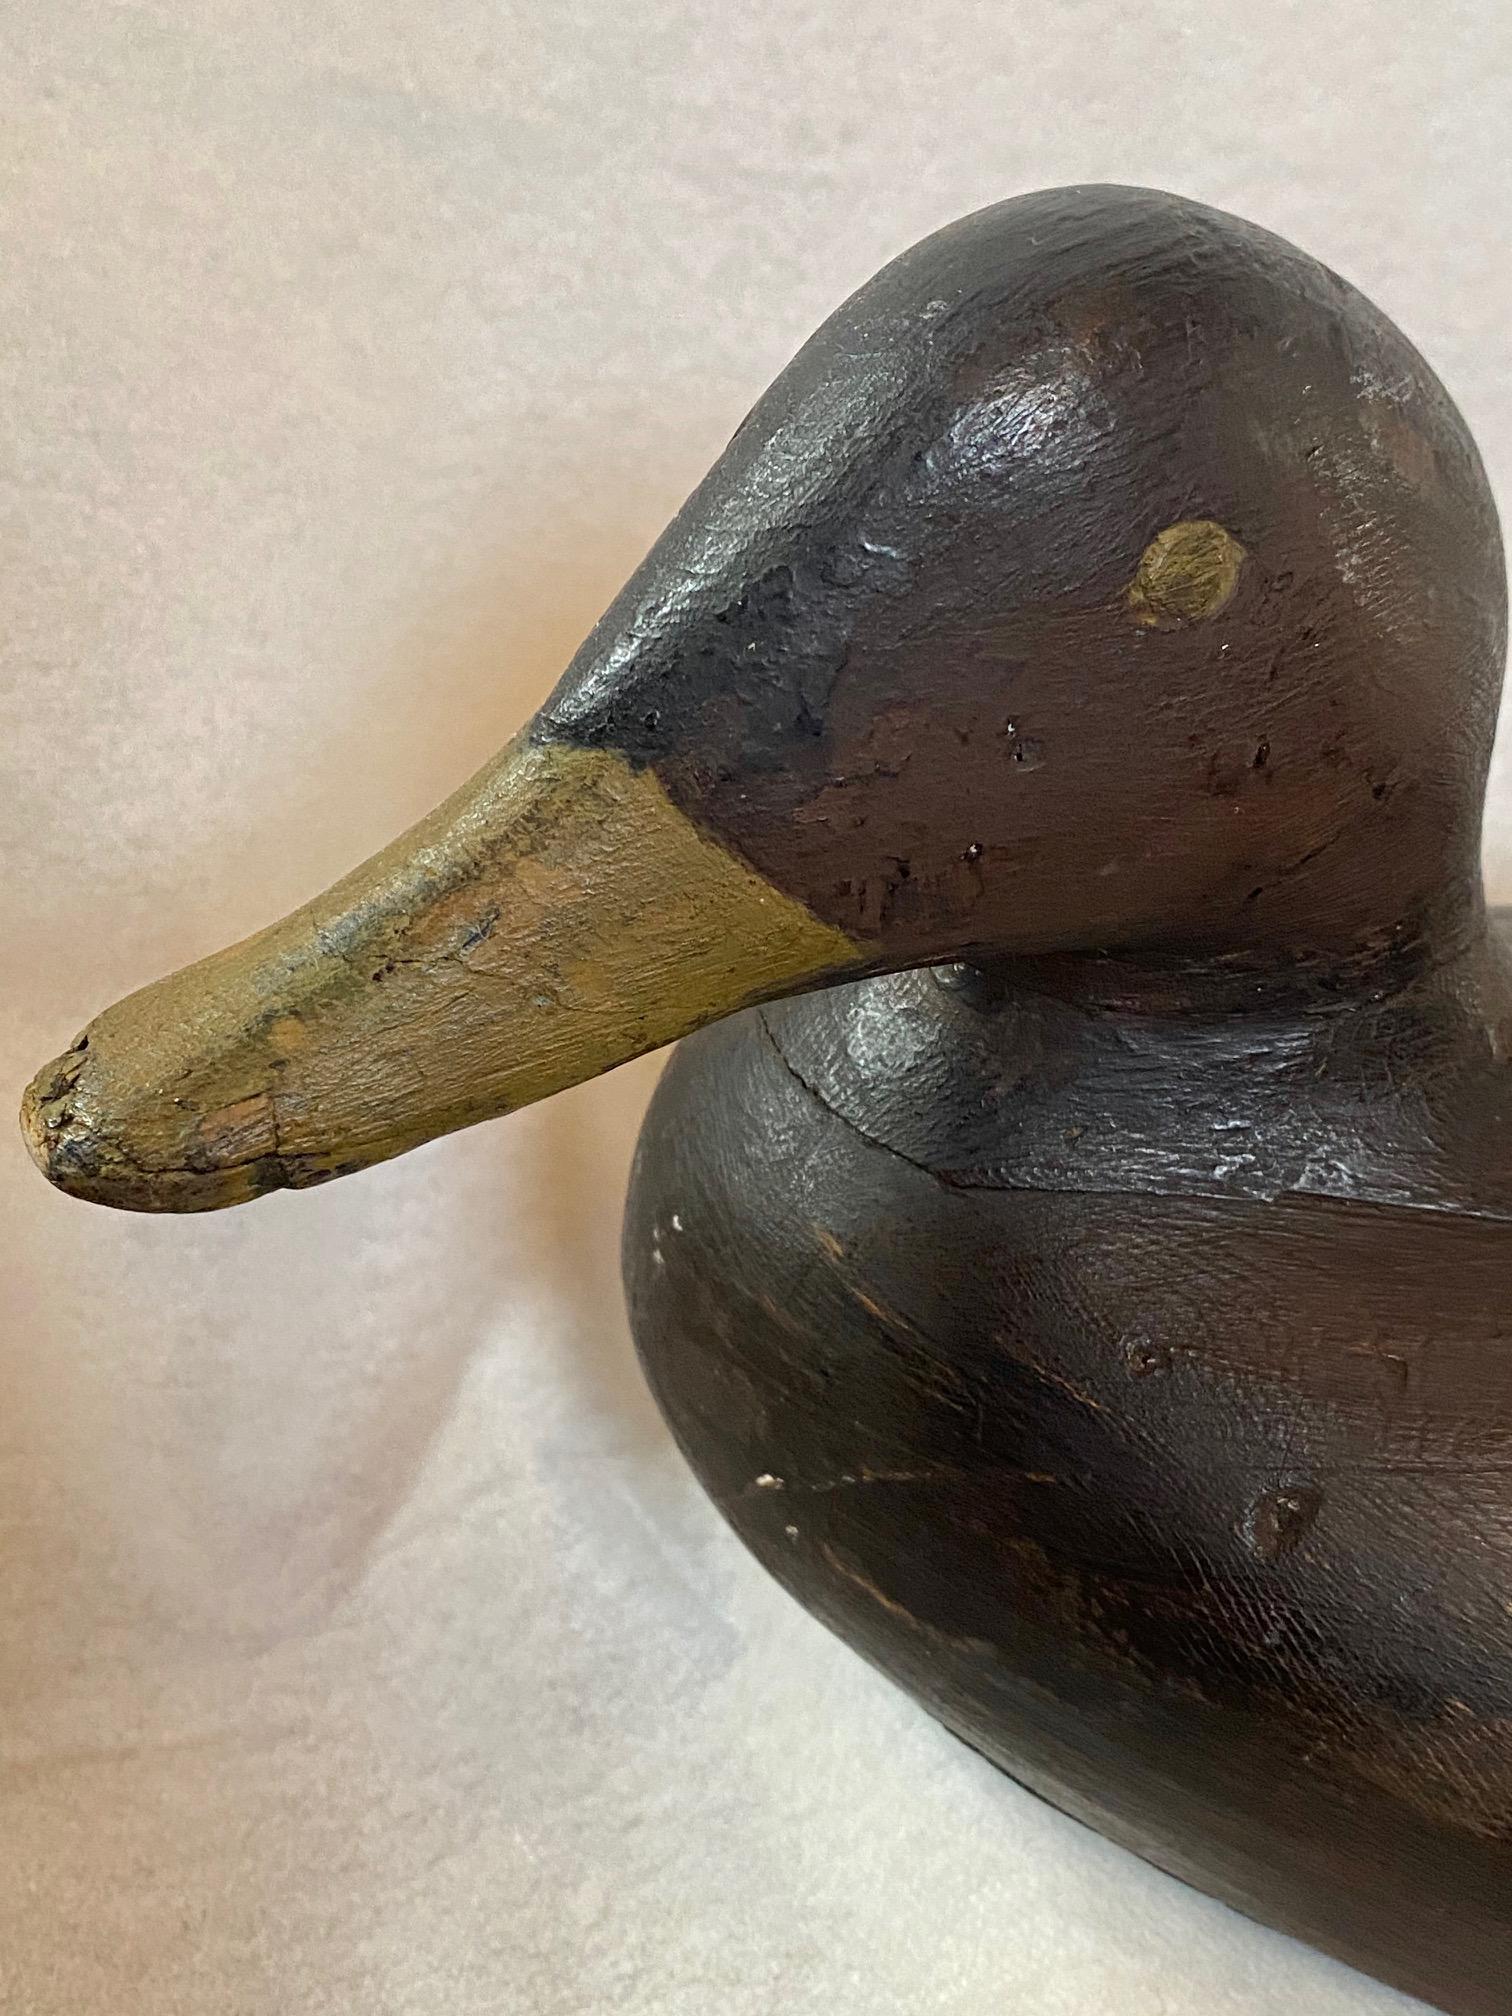 Classic Gus Wilson Turned Head Black Duck Decoy, South Portland Maine, circa 1930s, beautiful rough hewn gunning decoy by Maine's great Augustus Aaron Wilson (1864 - 1950), having the head set at alert angle turned strongly to left side, slightly